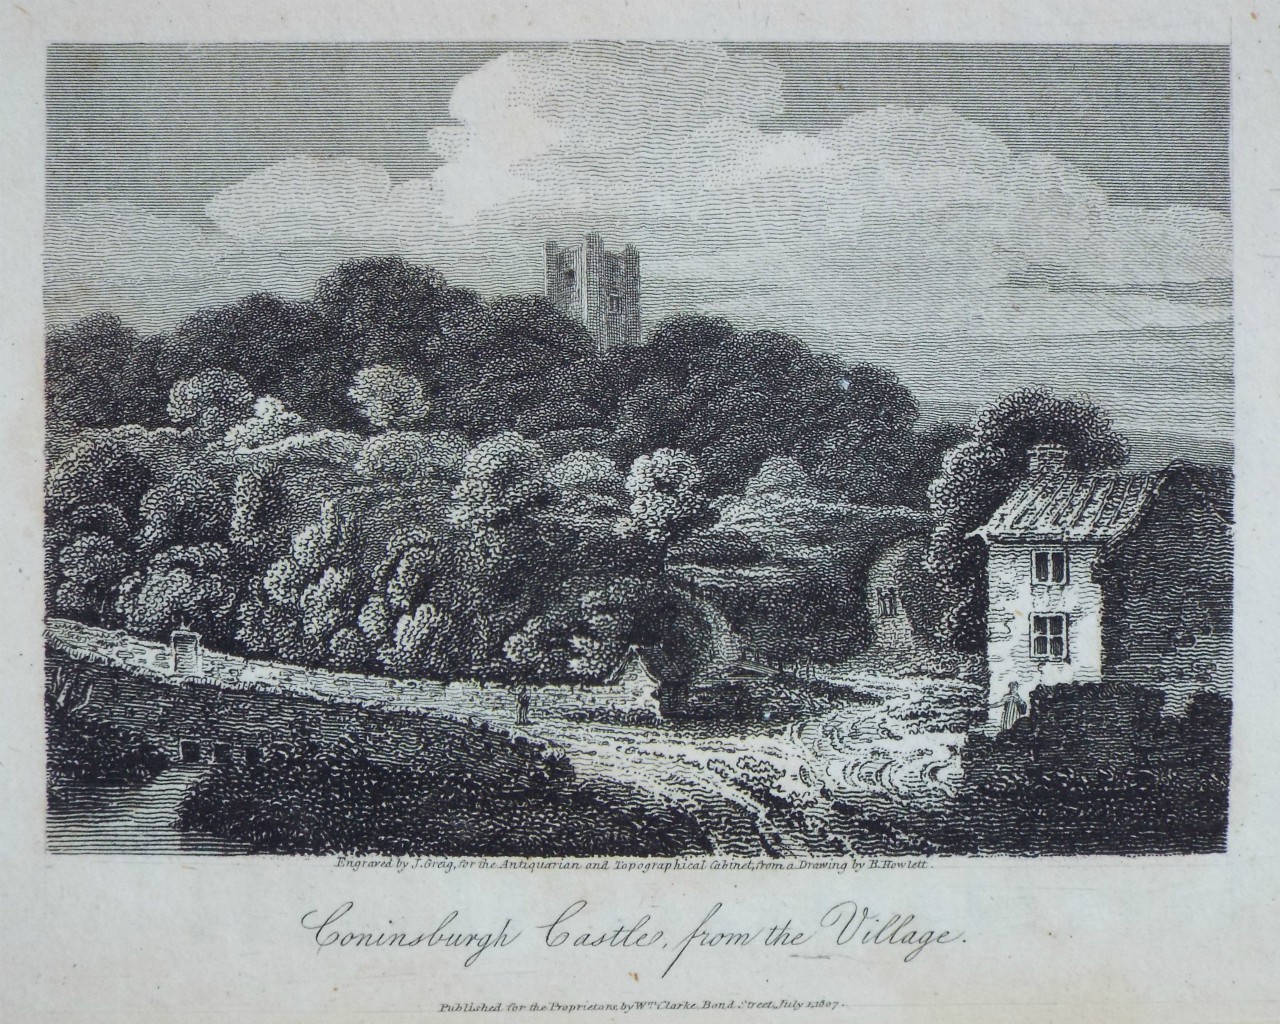 Print - Coninsburgh Castle, from the Village. - Greig